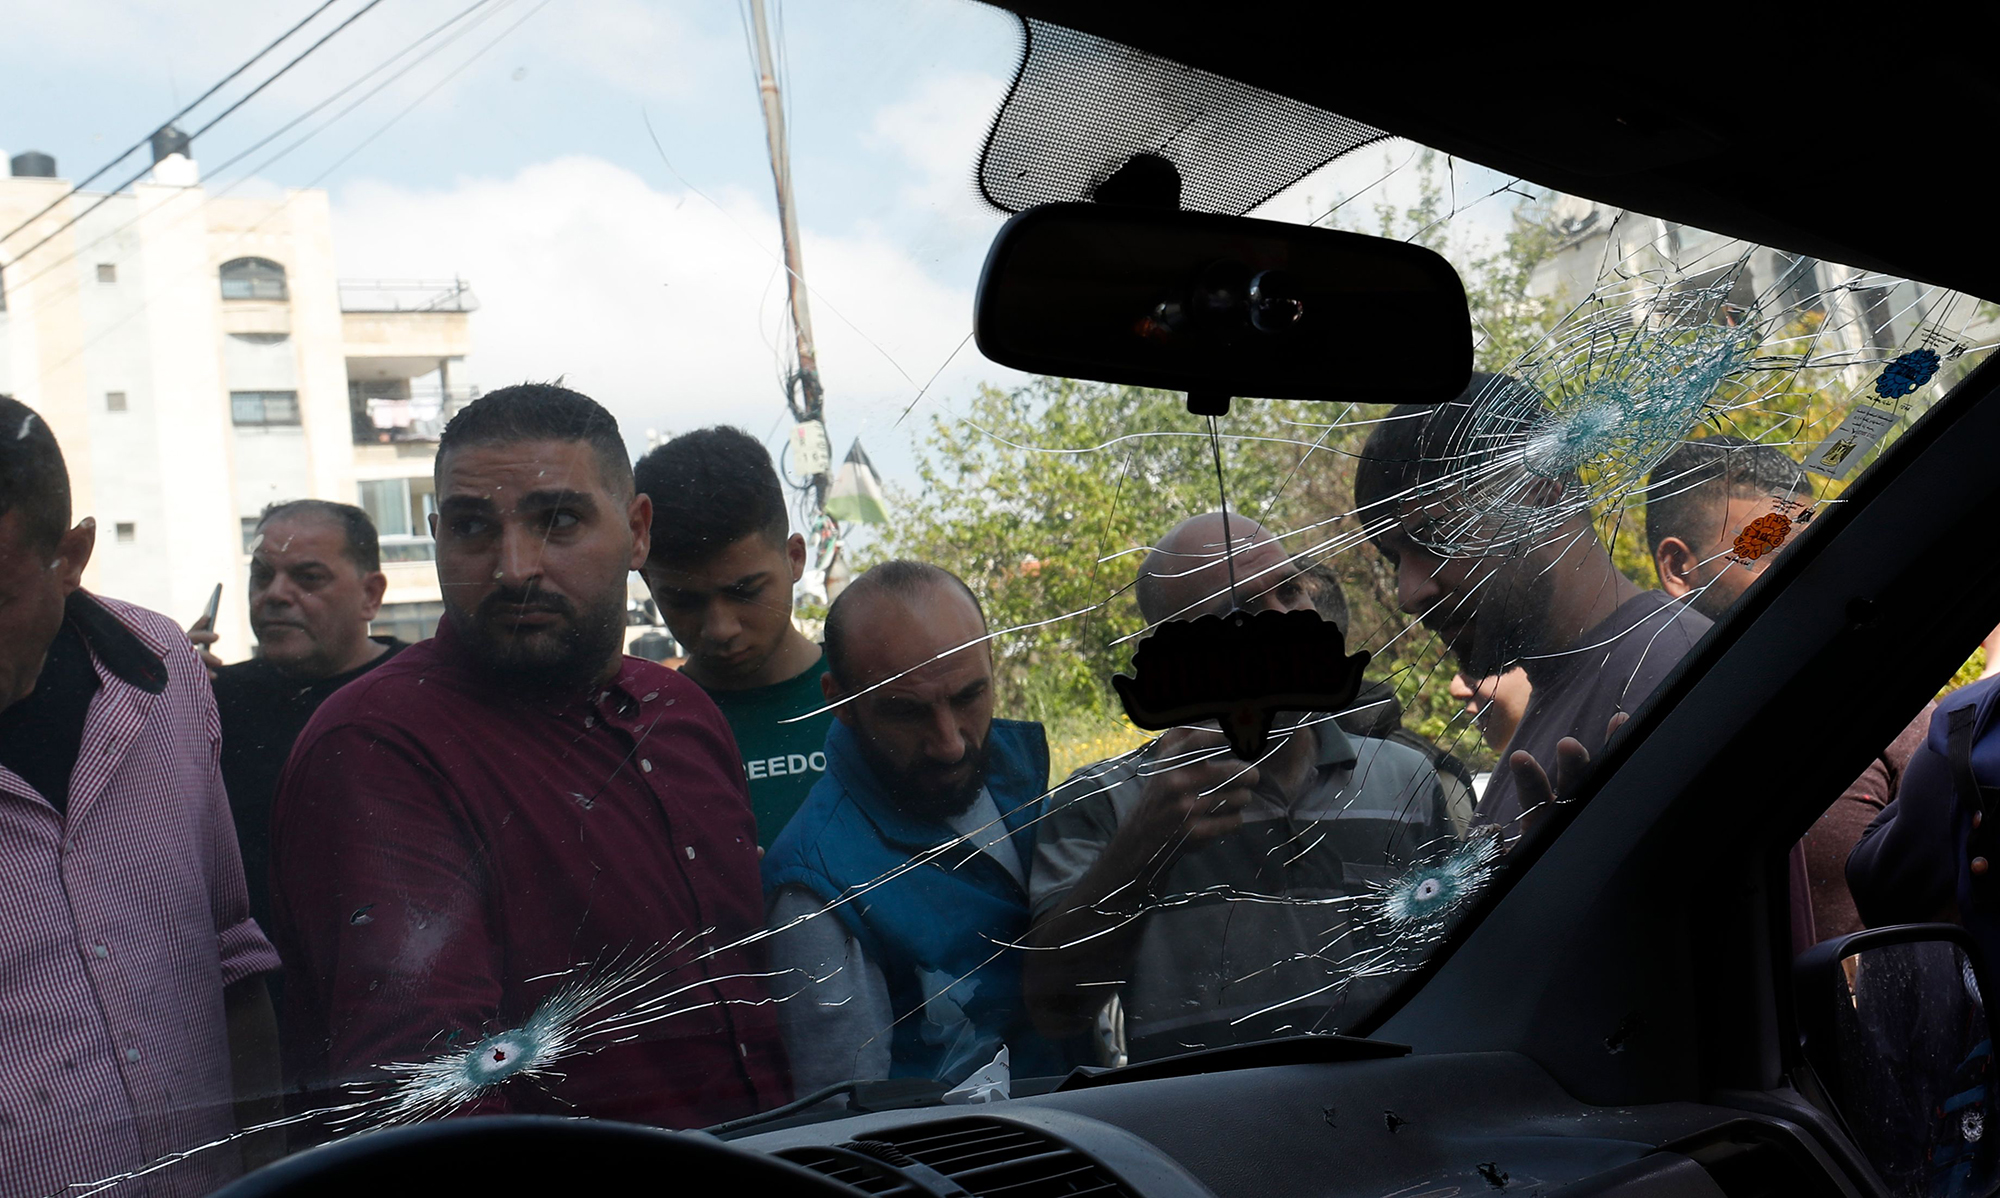 Palestinians inspect the car of a man who was injured in an Israeli raid in the West Bank city of Nablus, on April 15.